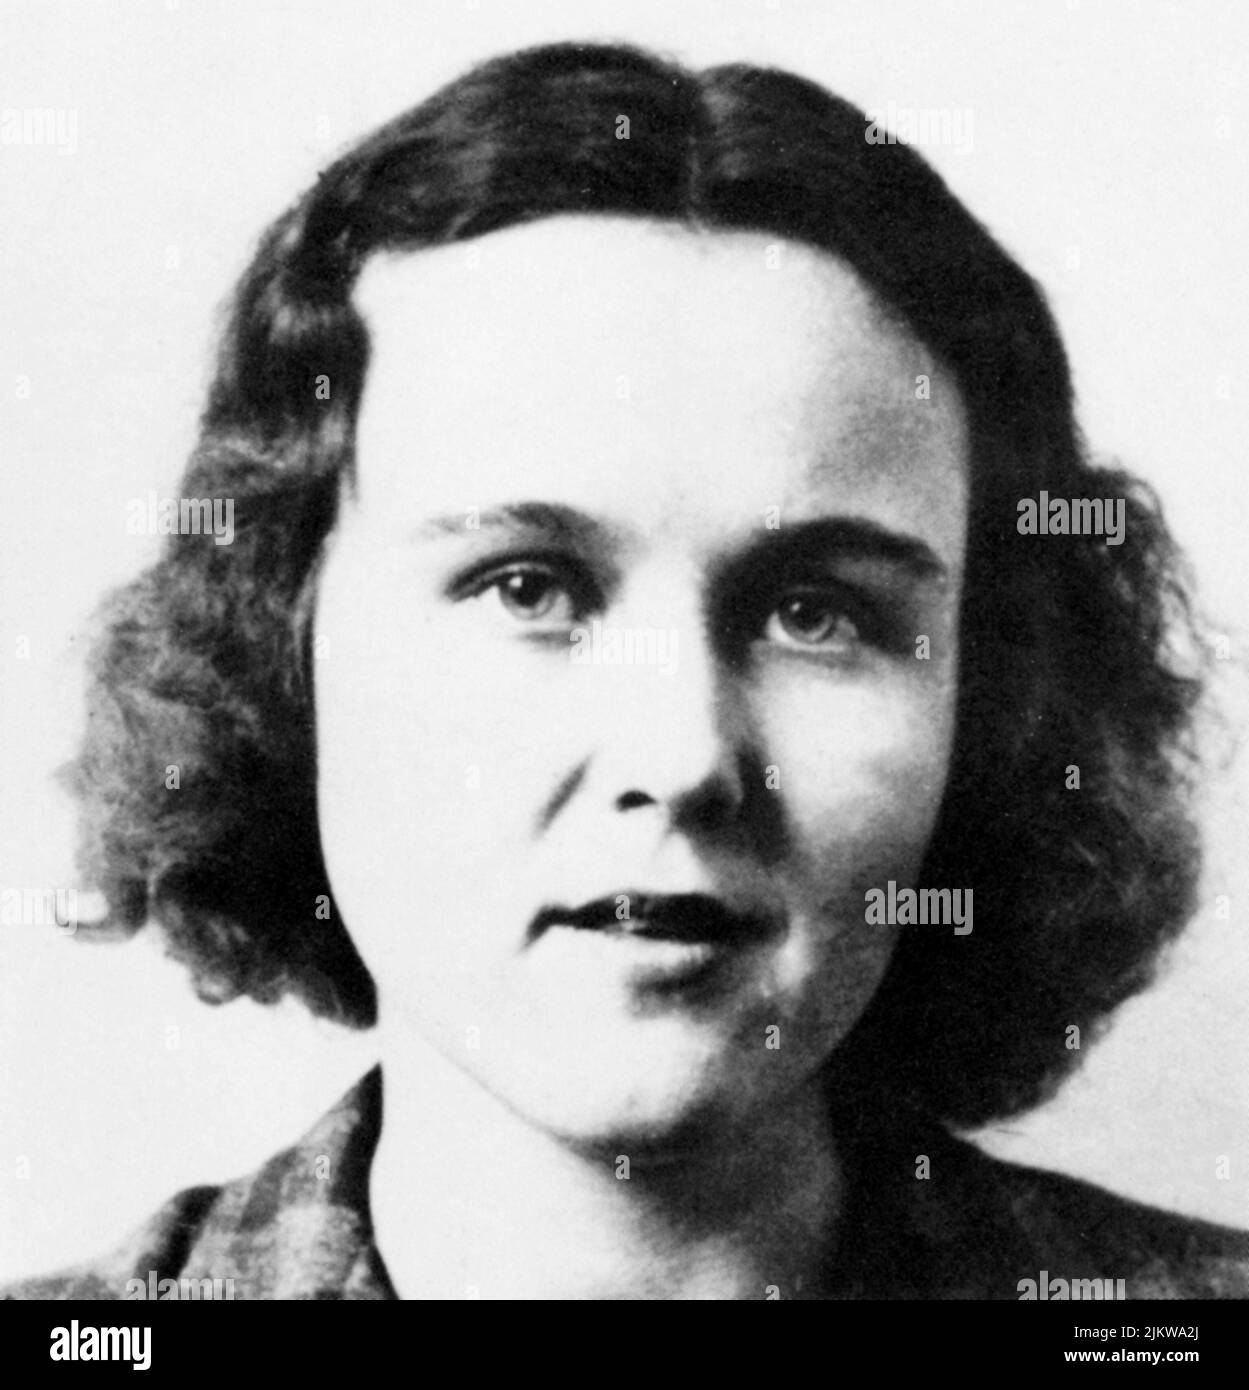 1951 : JOAN VOLLMER , just few times befor her death , killed by her husband the celebrated american scandalous writer WILLIAM BURROUGHS ( Saint Louis 1914 - Lawrence , KS 1997 )  - POETA - POET - POETRY - BEAT GENERATION - LETTERATO - LITERATURE - LETTERATURA - portrait - ritratto - moglie - wife  ----  Archivio GBB Stock Photo